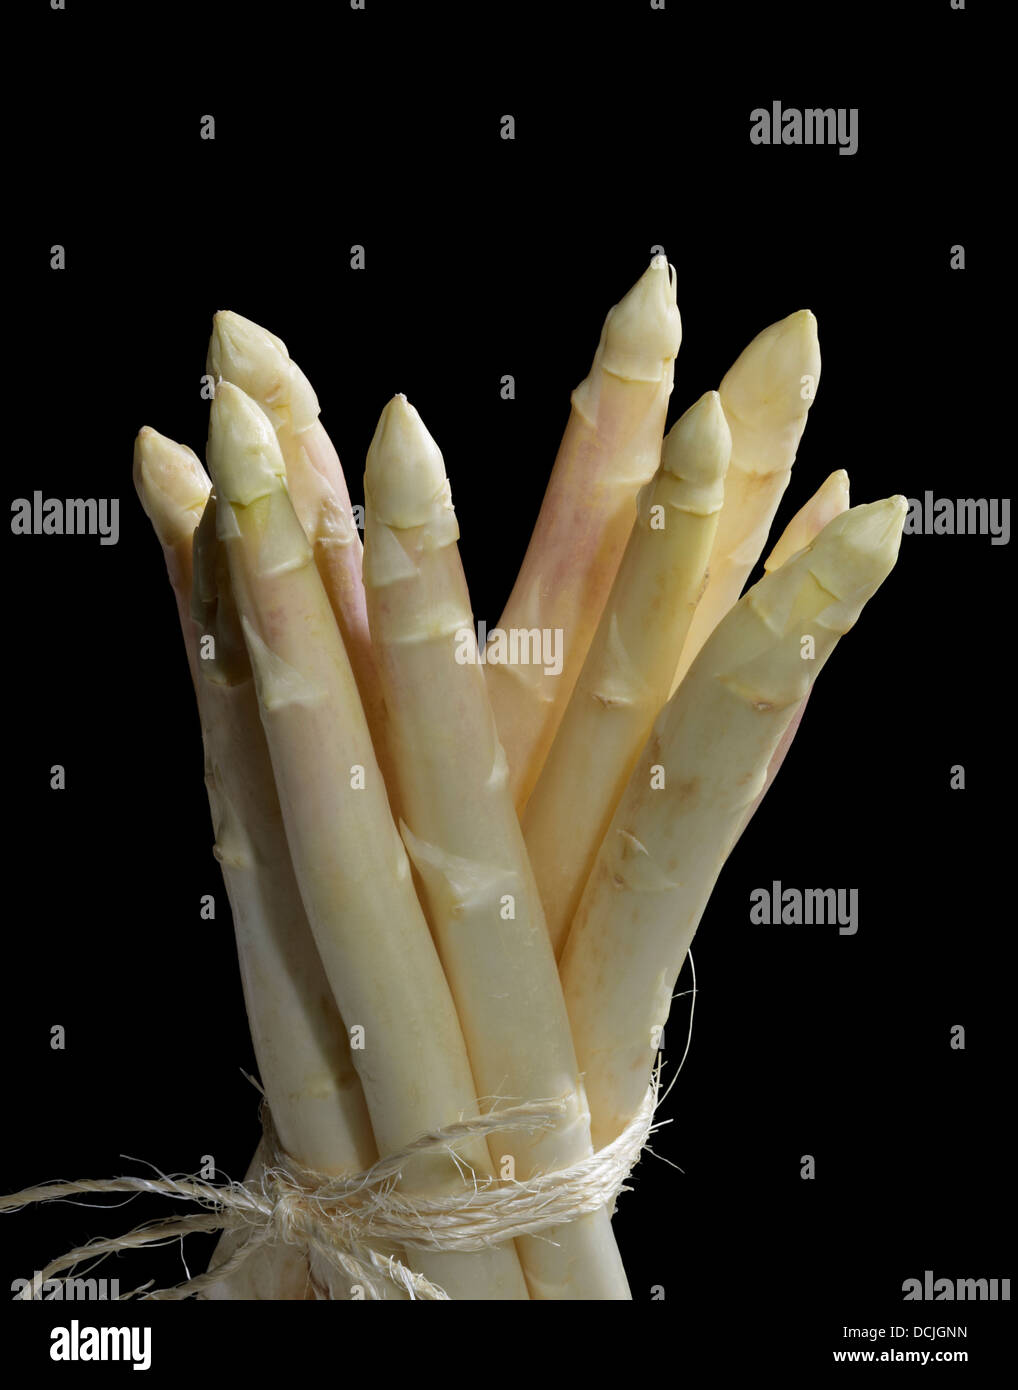 bunch of white asparagus vegetable in front of black back Stock Photo